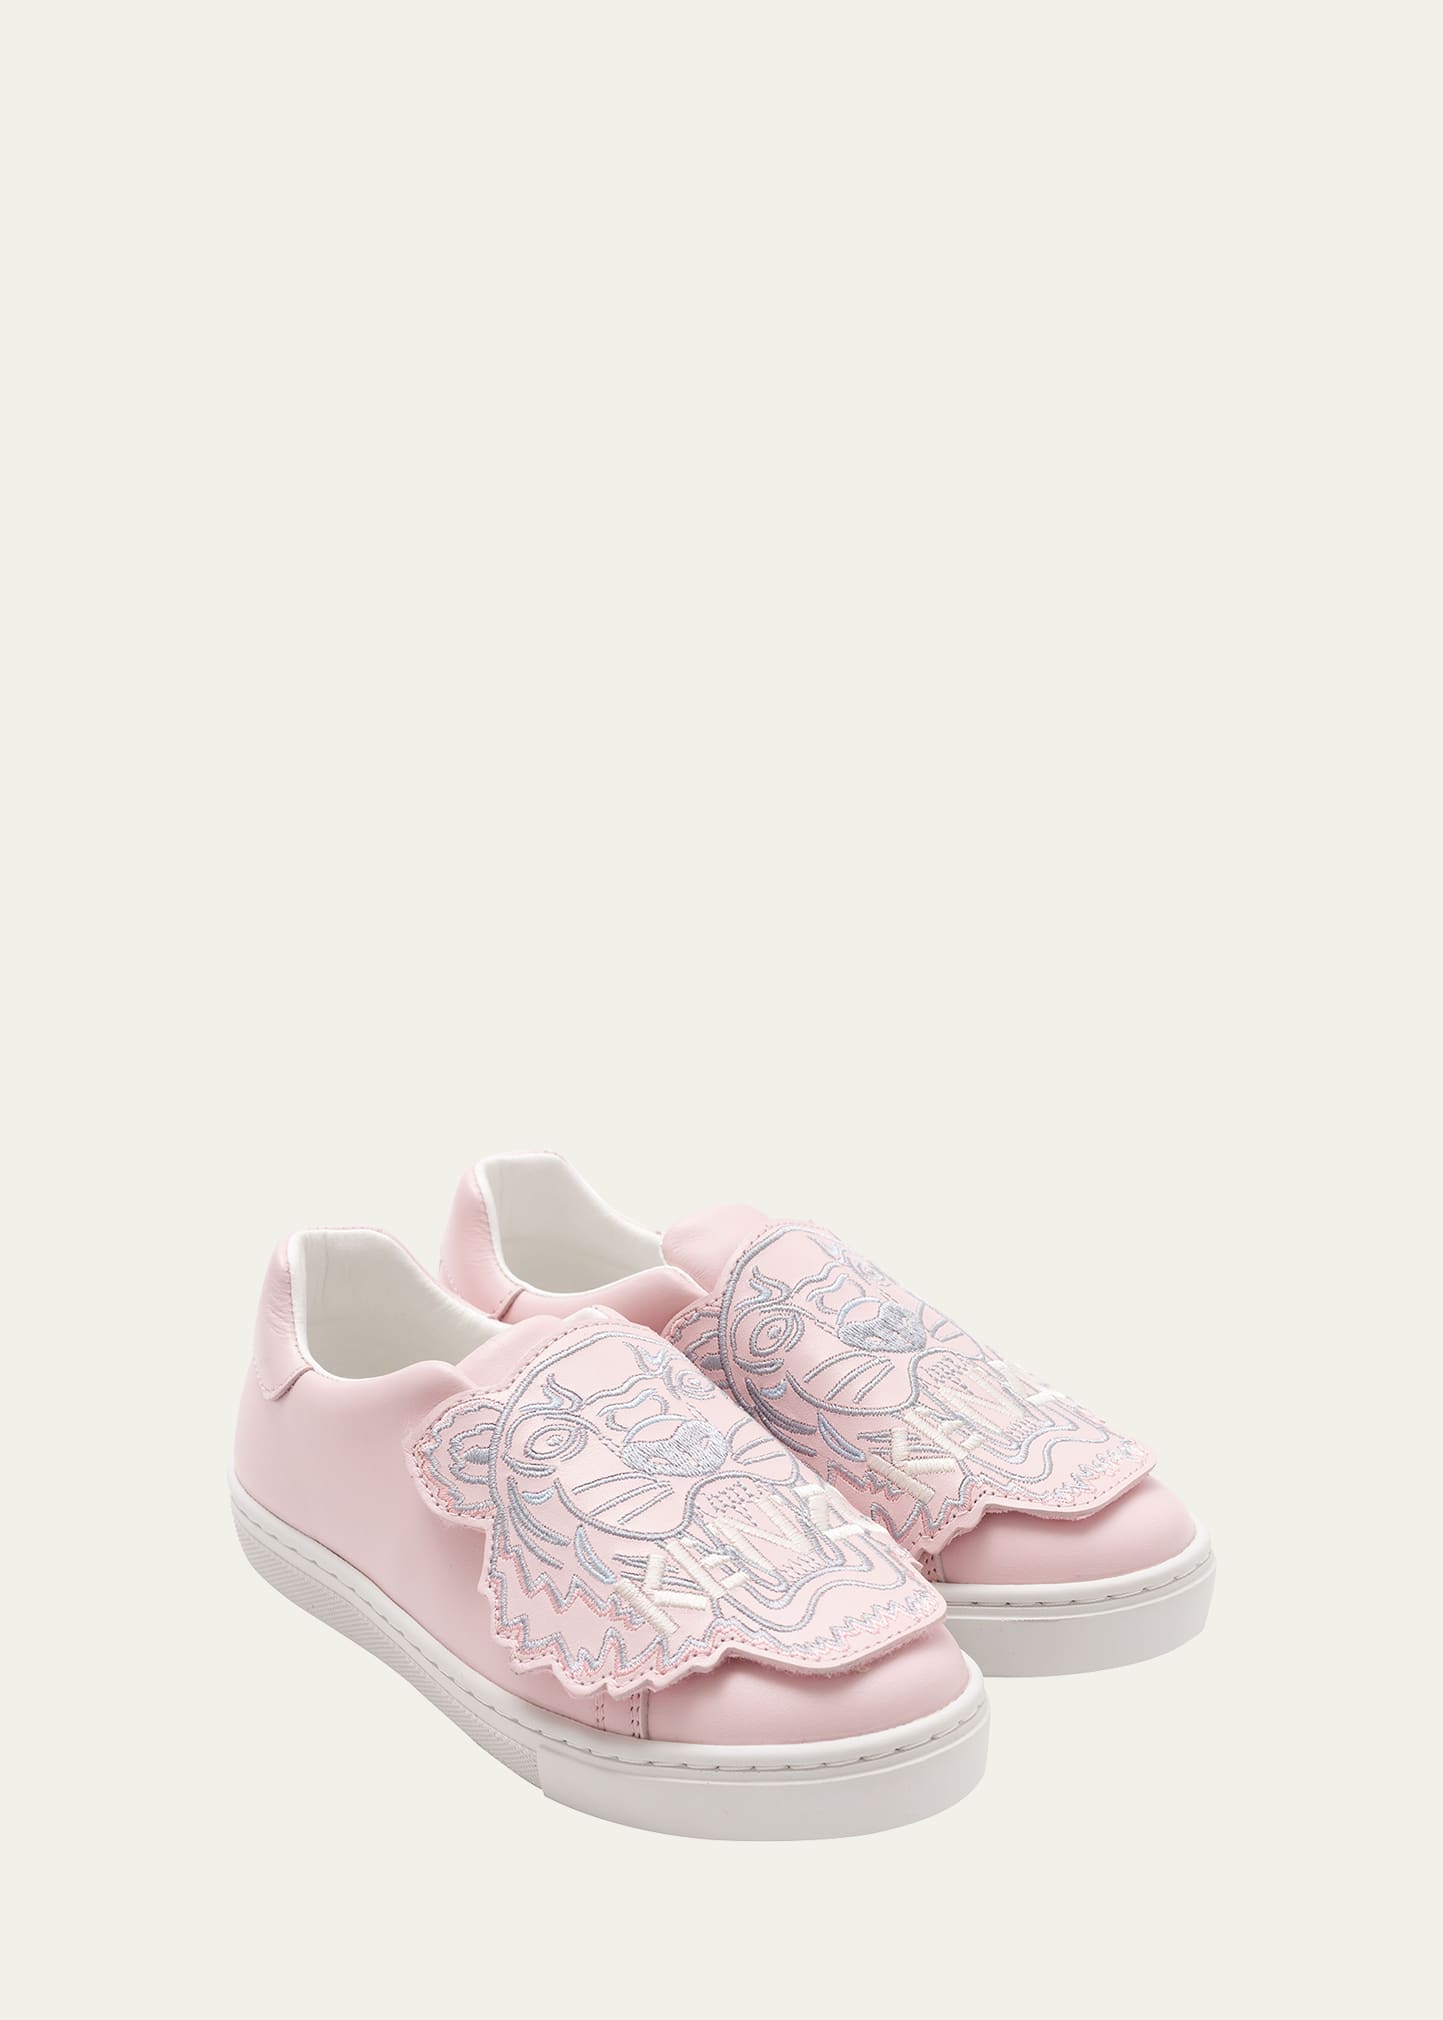 Kenzo Kid's Tiger Leather Low-top Sneakers, Baby/toddlers In Pink